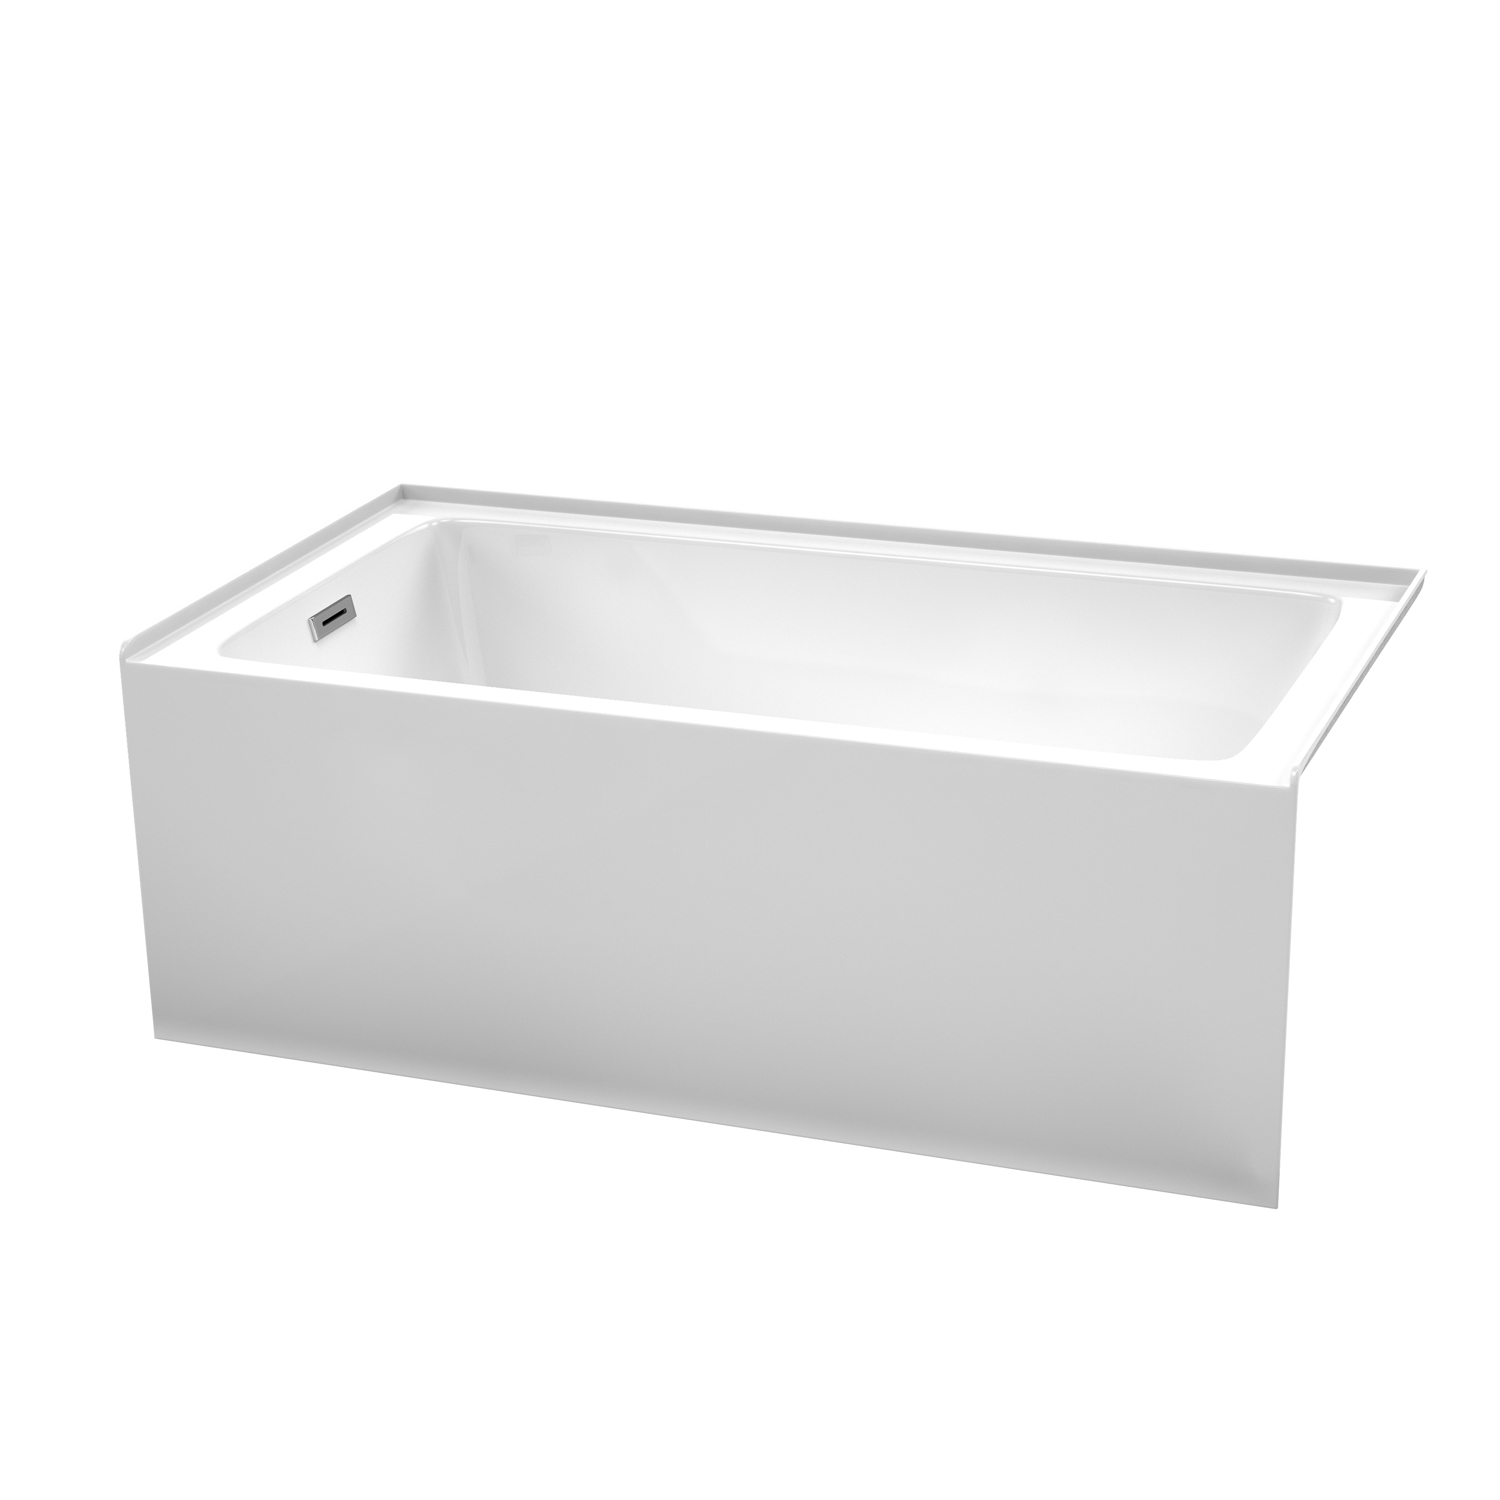 60 x 32" Acrylic Bathtub in White with Left-Hand Drain and Overflow Trim in Polished Chrome